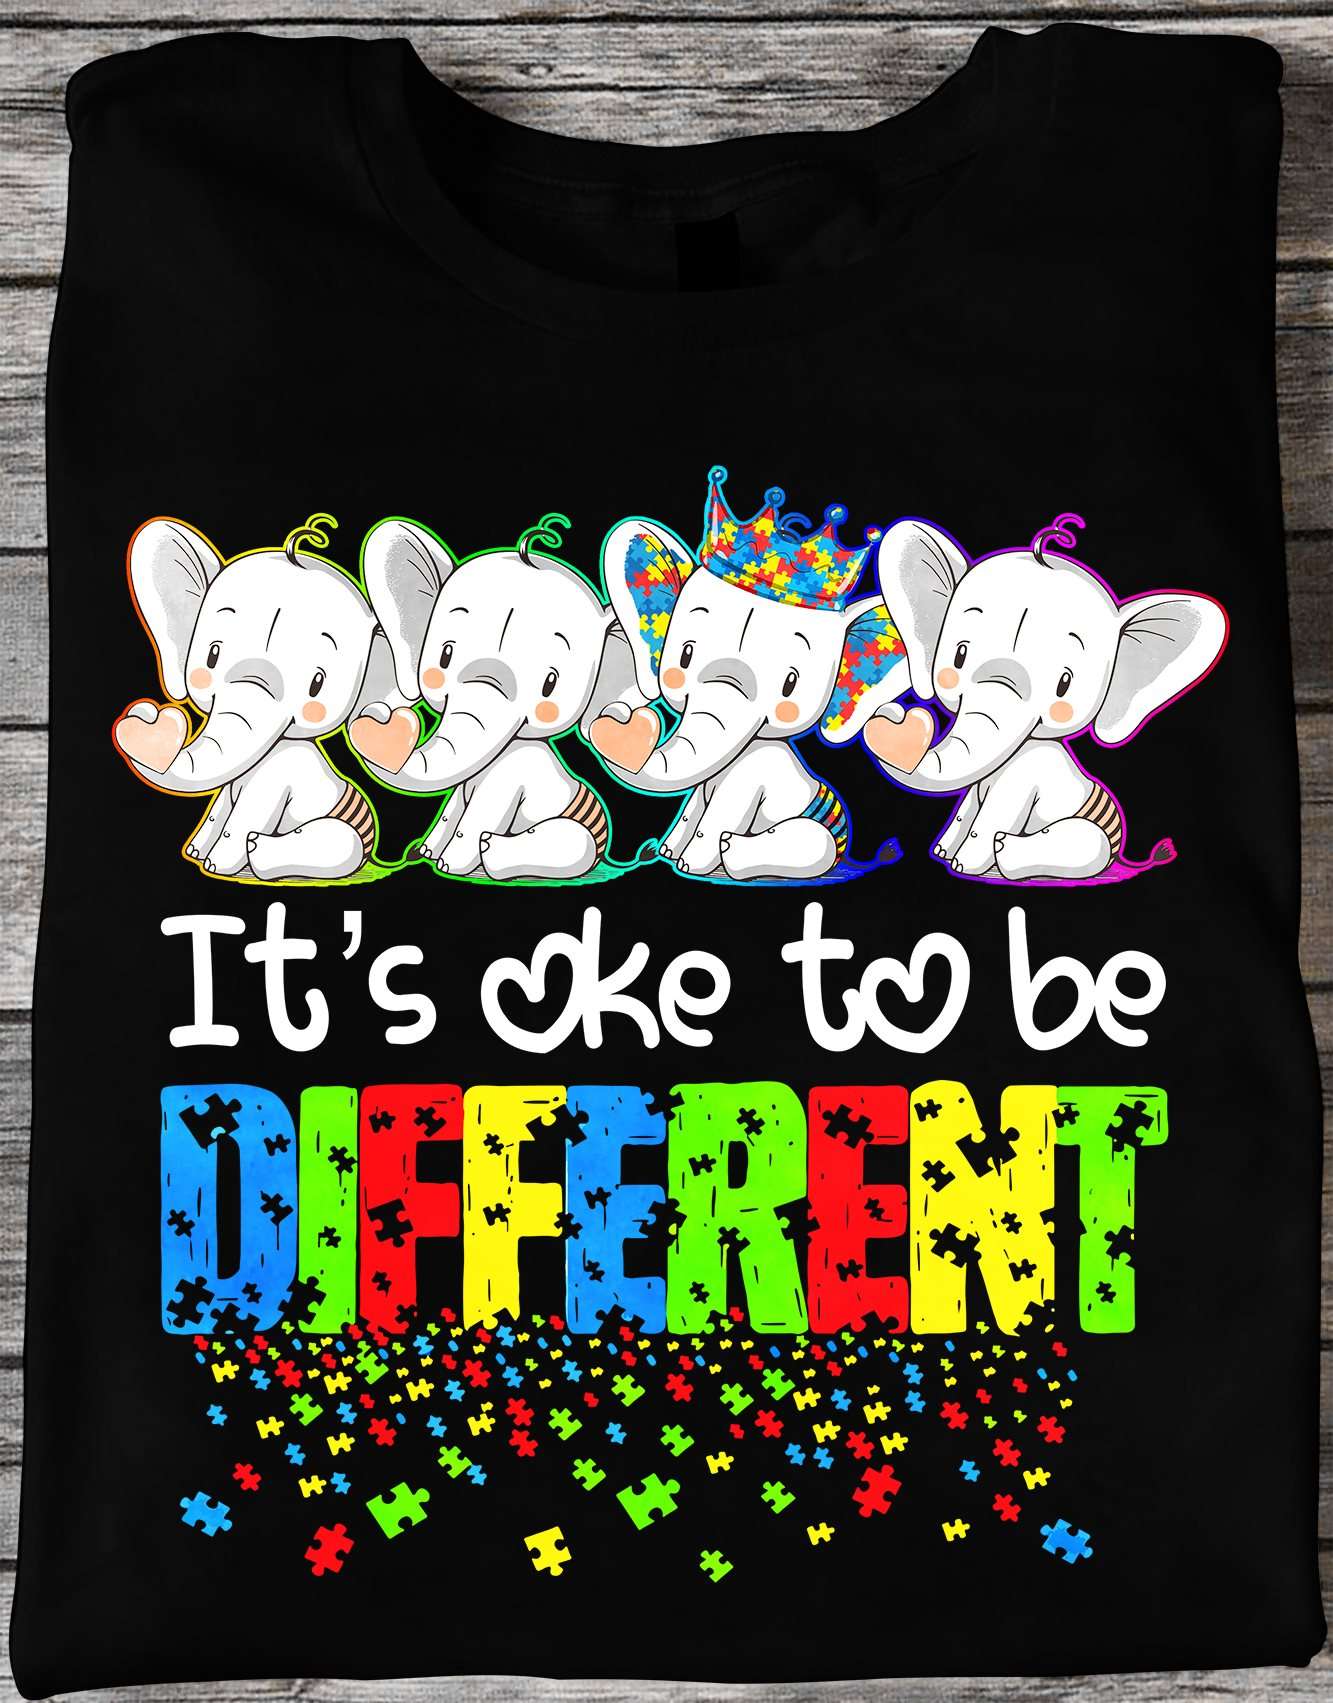 It's oke to be different - Elephant autism, autism awareness T-shirt